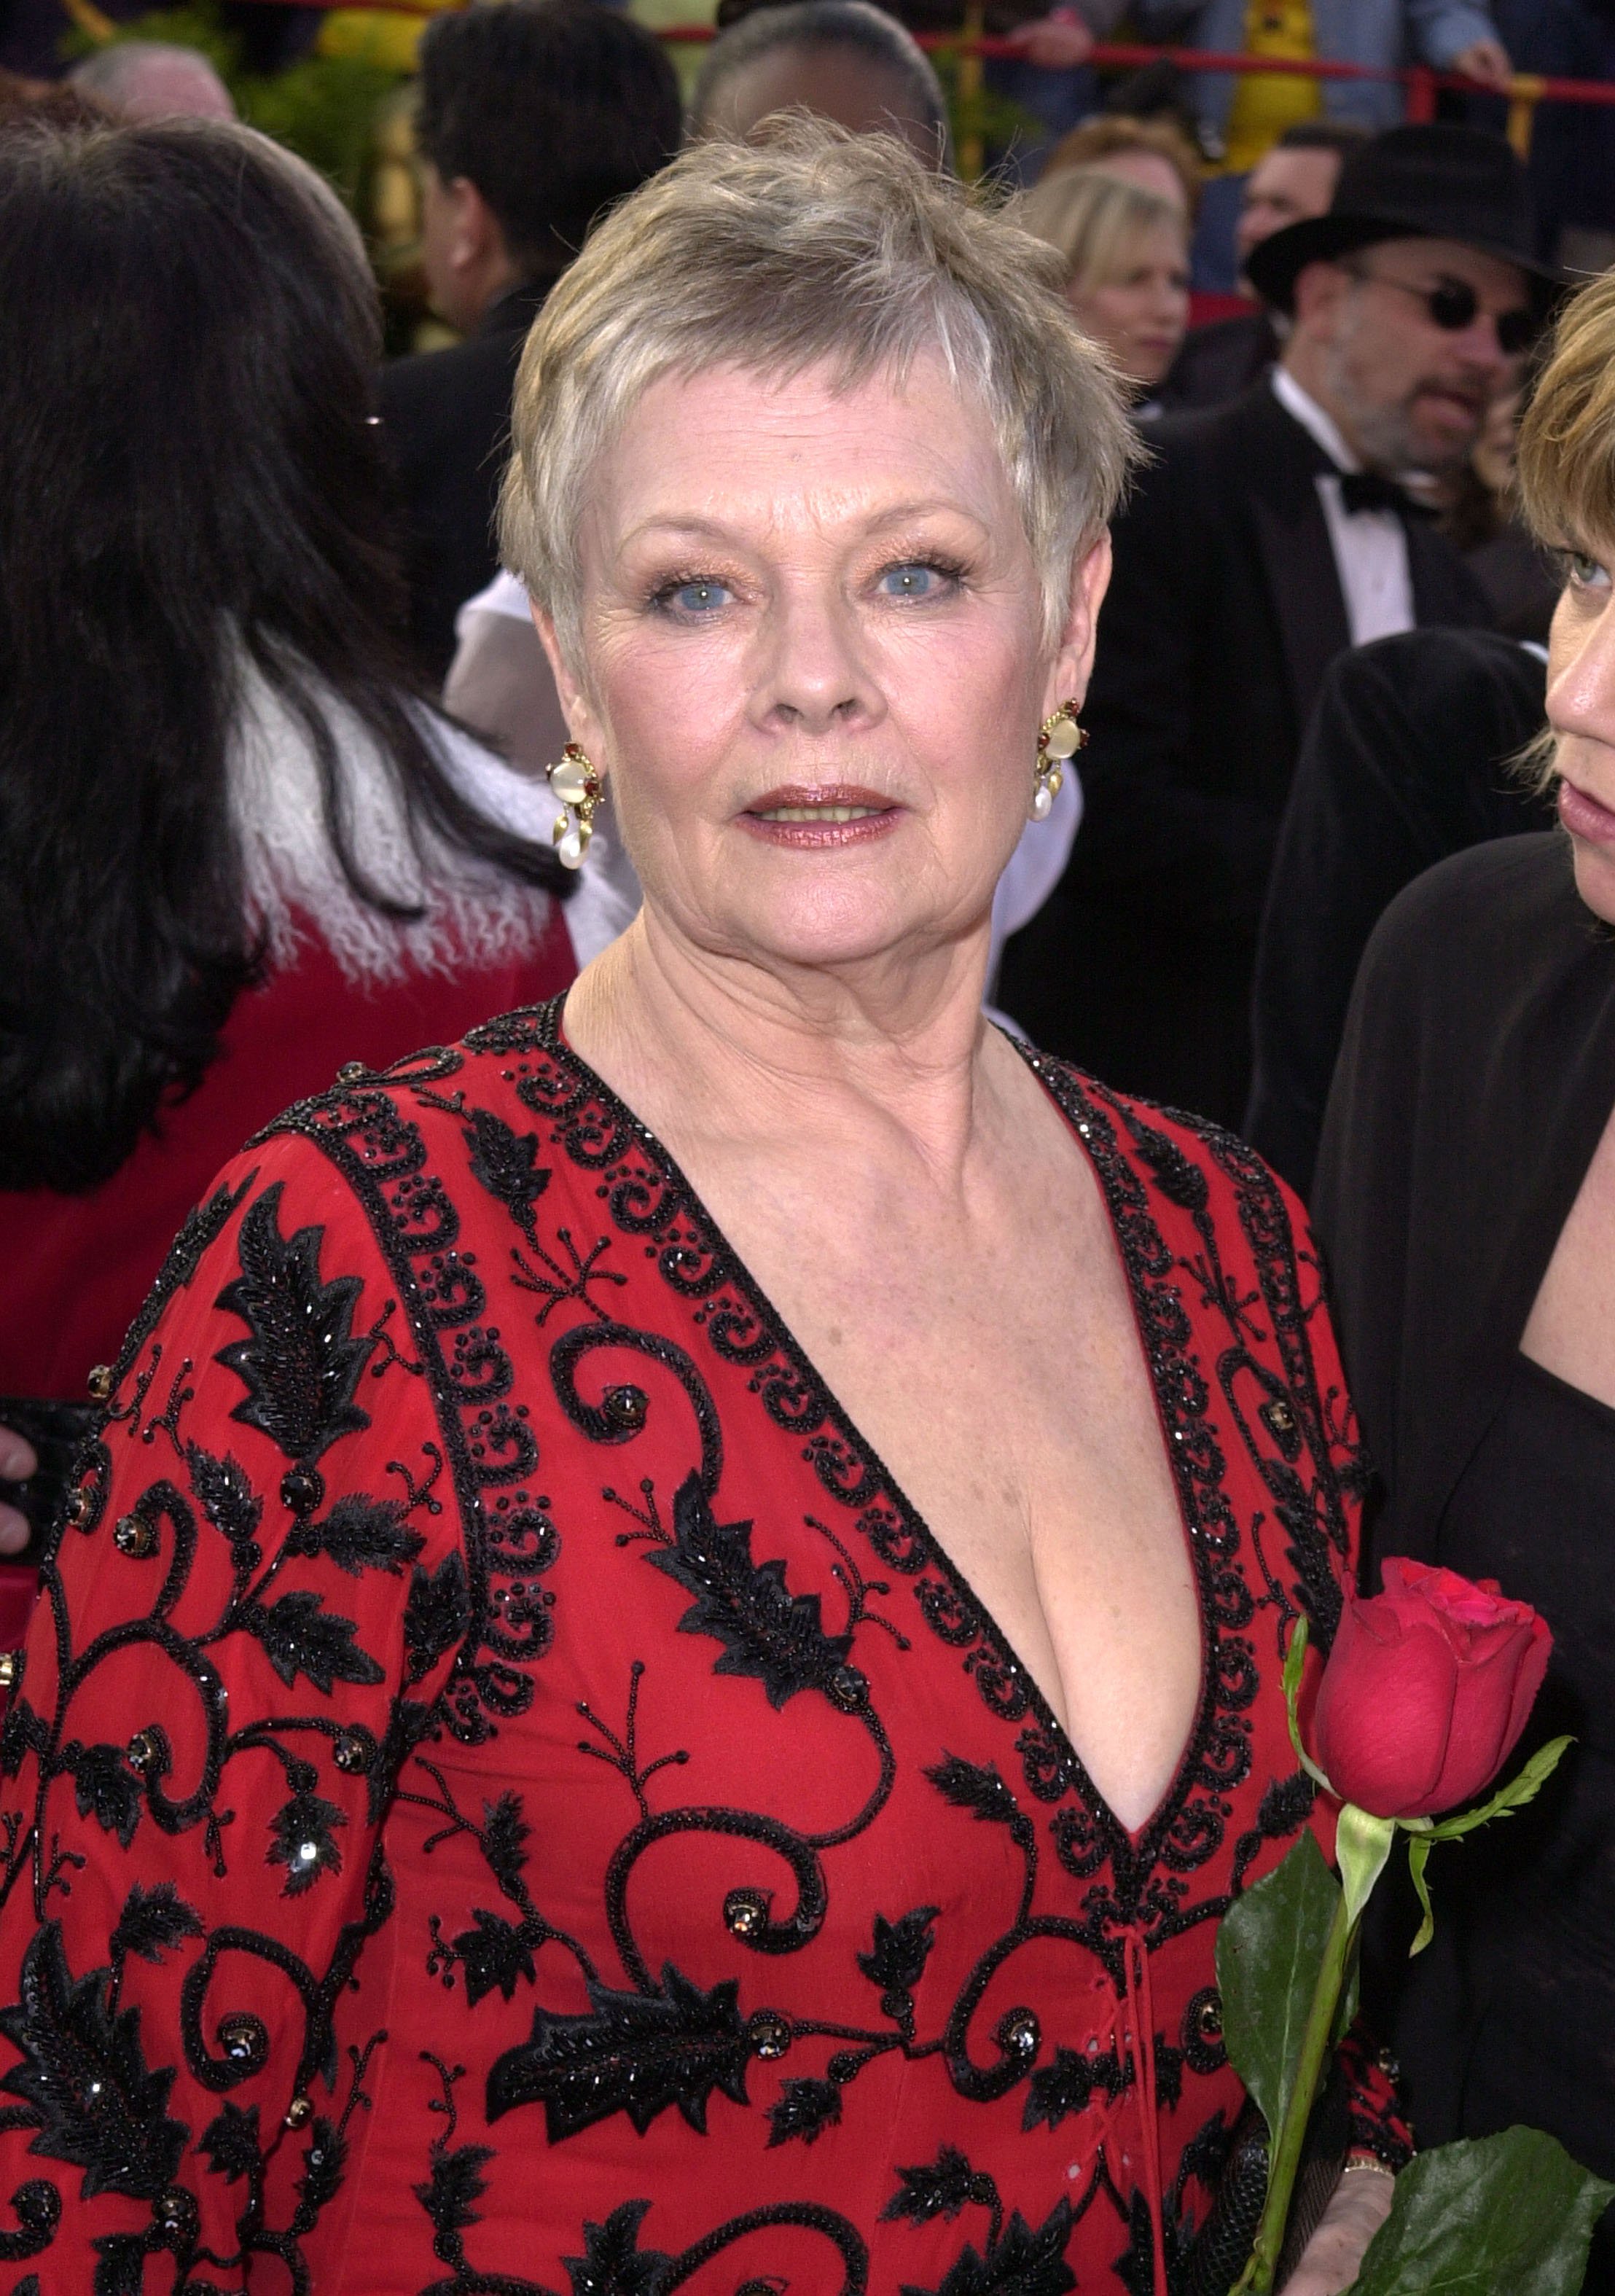 Judi Dench at the 73rd Annual Academy Awards | Source: Getty Images